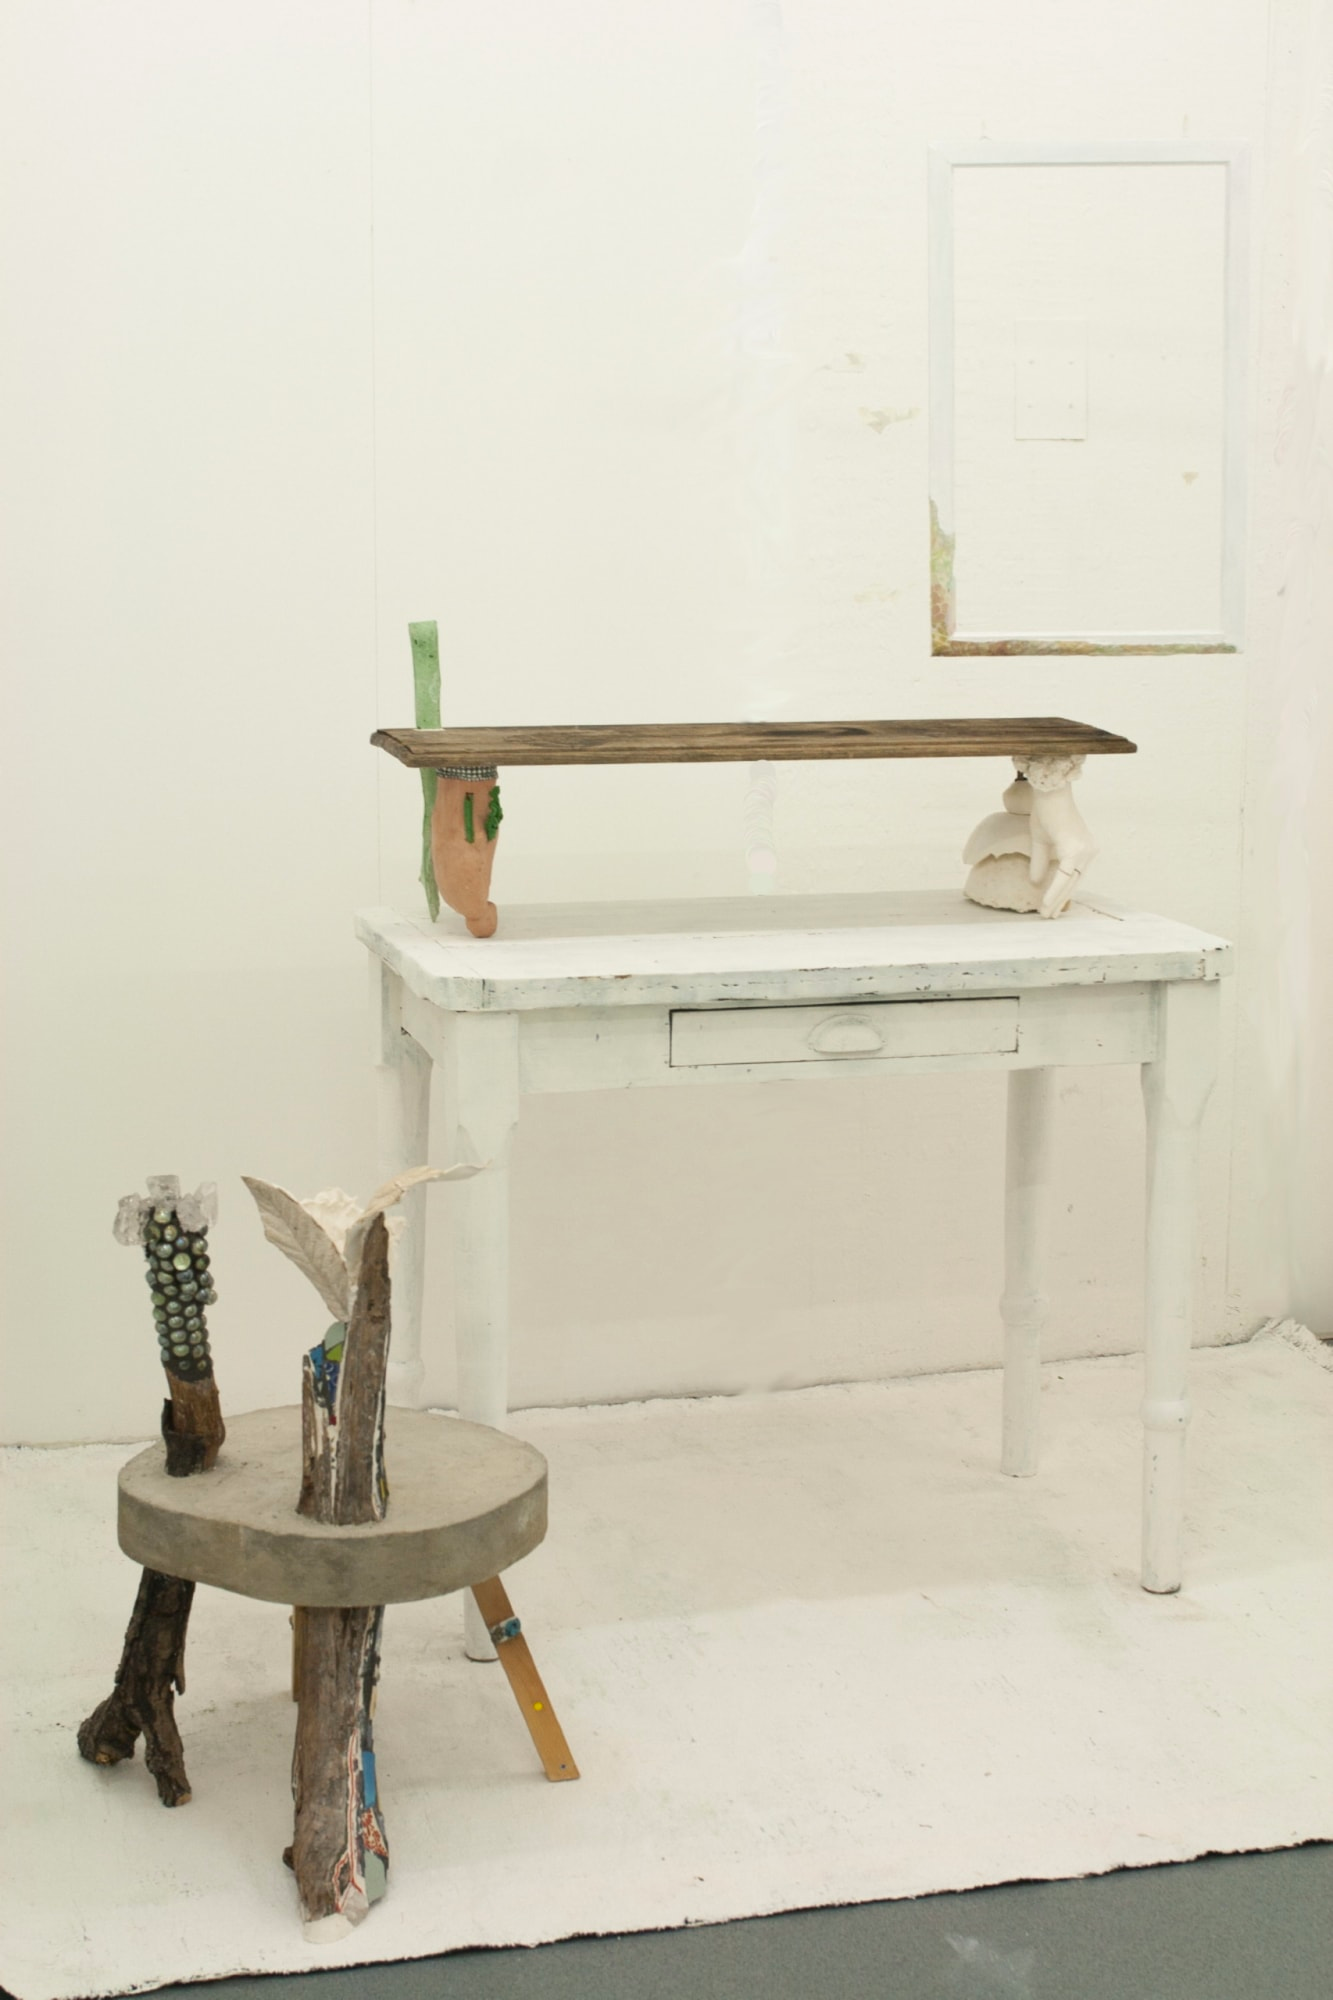 Image of a wooden table with one drawer, painted white, with a sort of shelf on it, alongside a wooden stool made from various items, against a white wall.